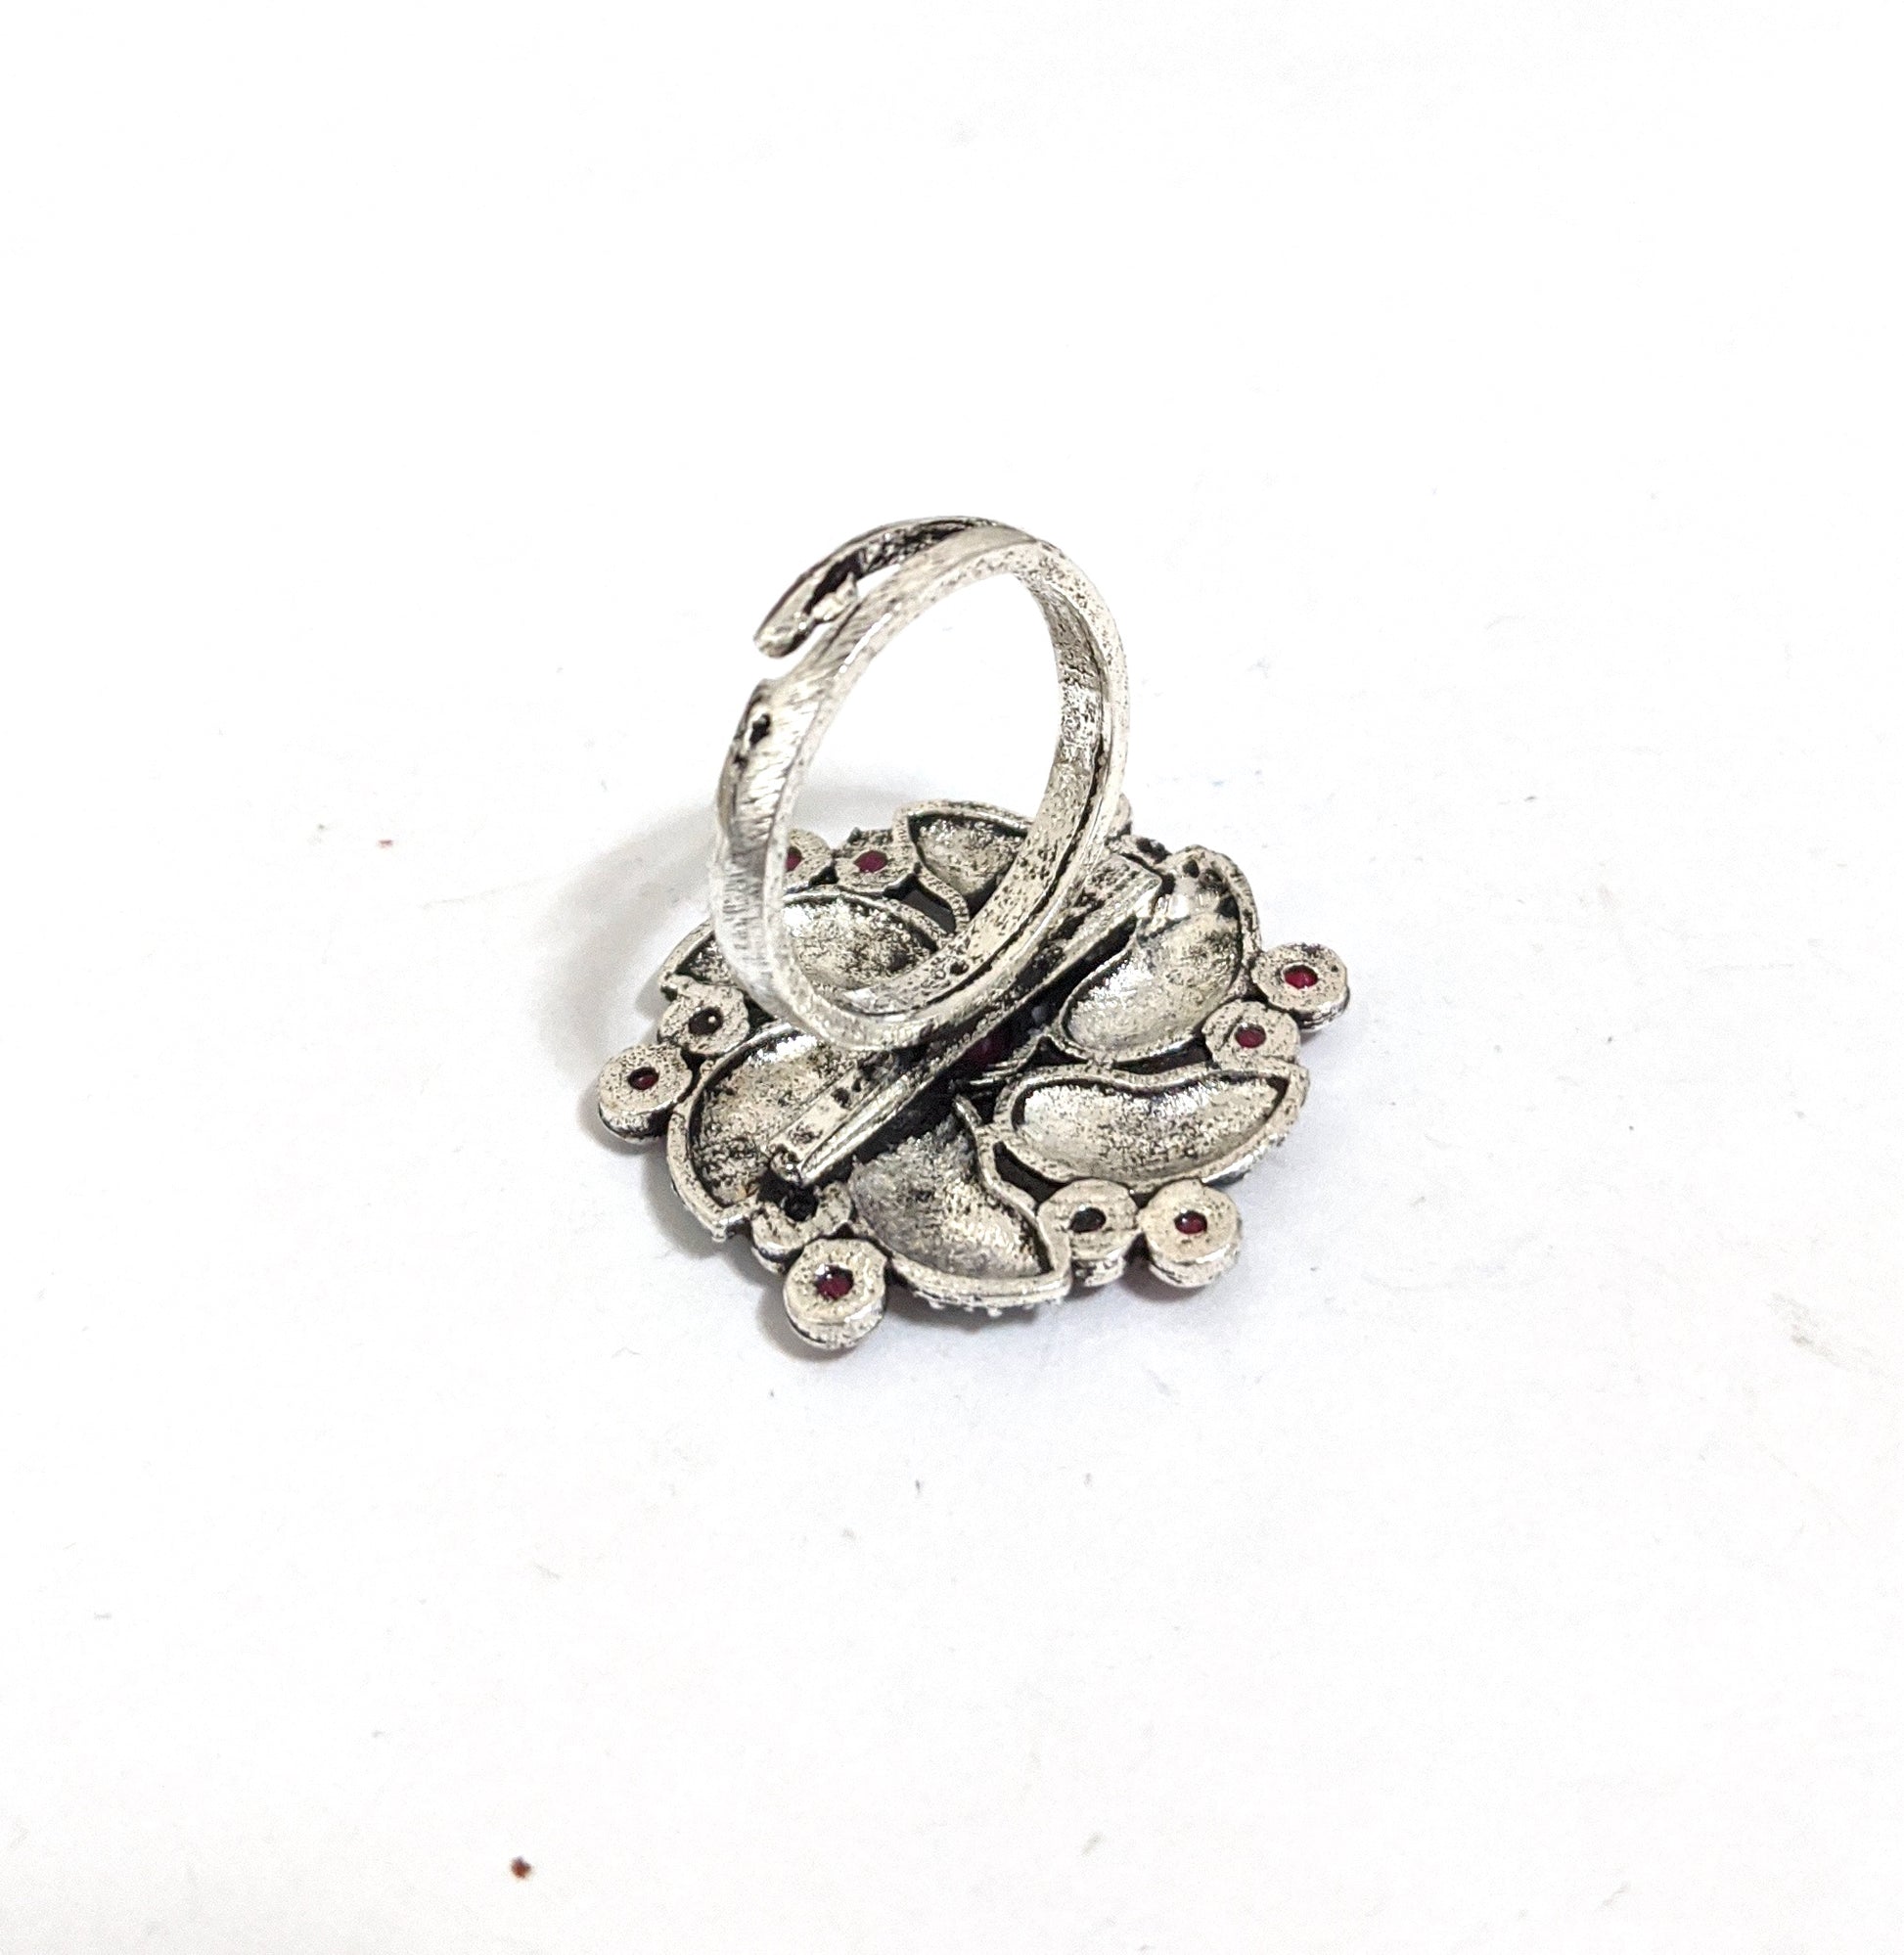 Oxidized silver Peacock flower design Adjustable Finger rings - Simpliful